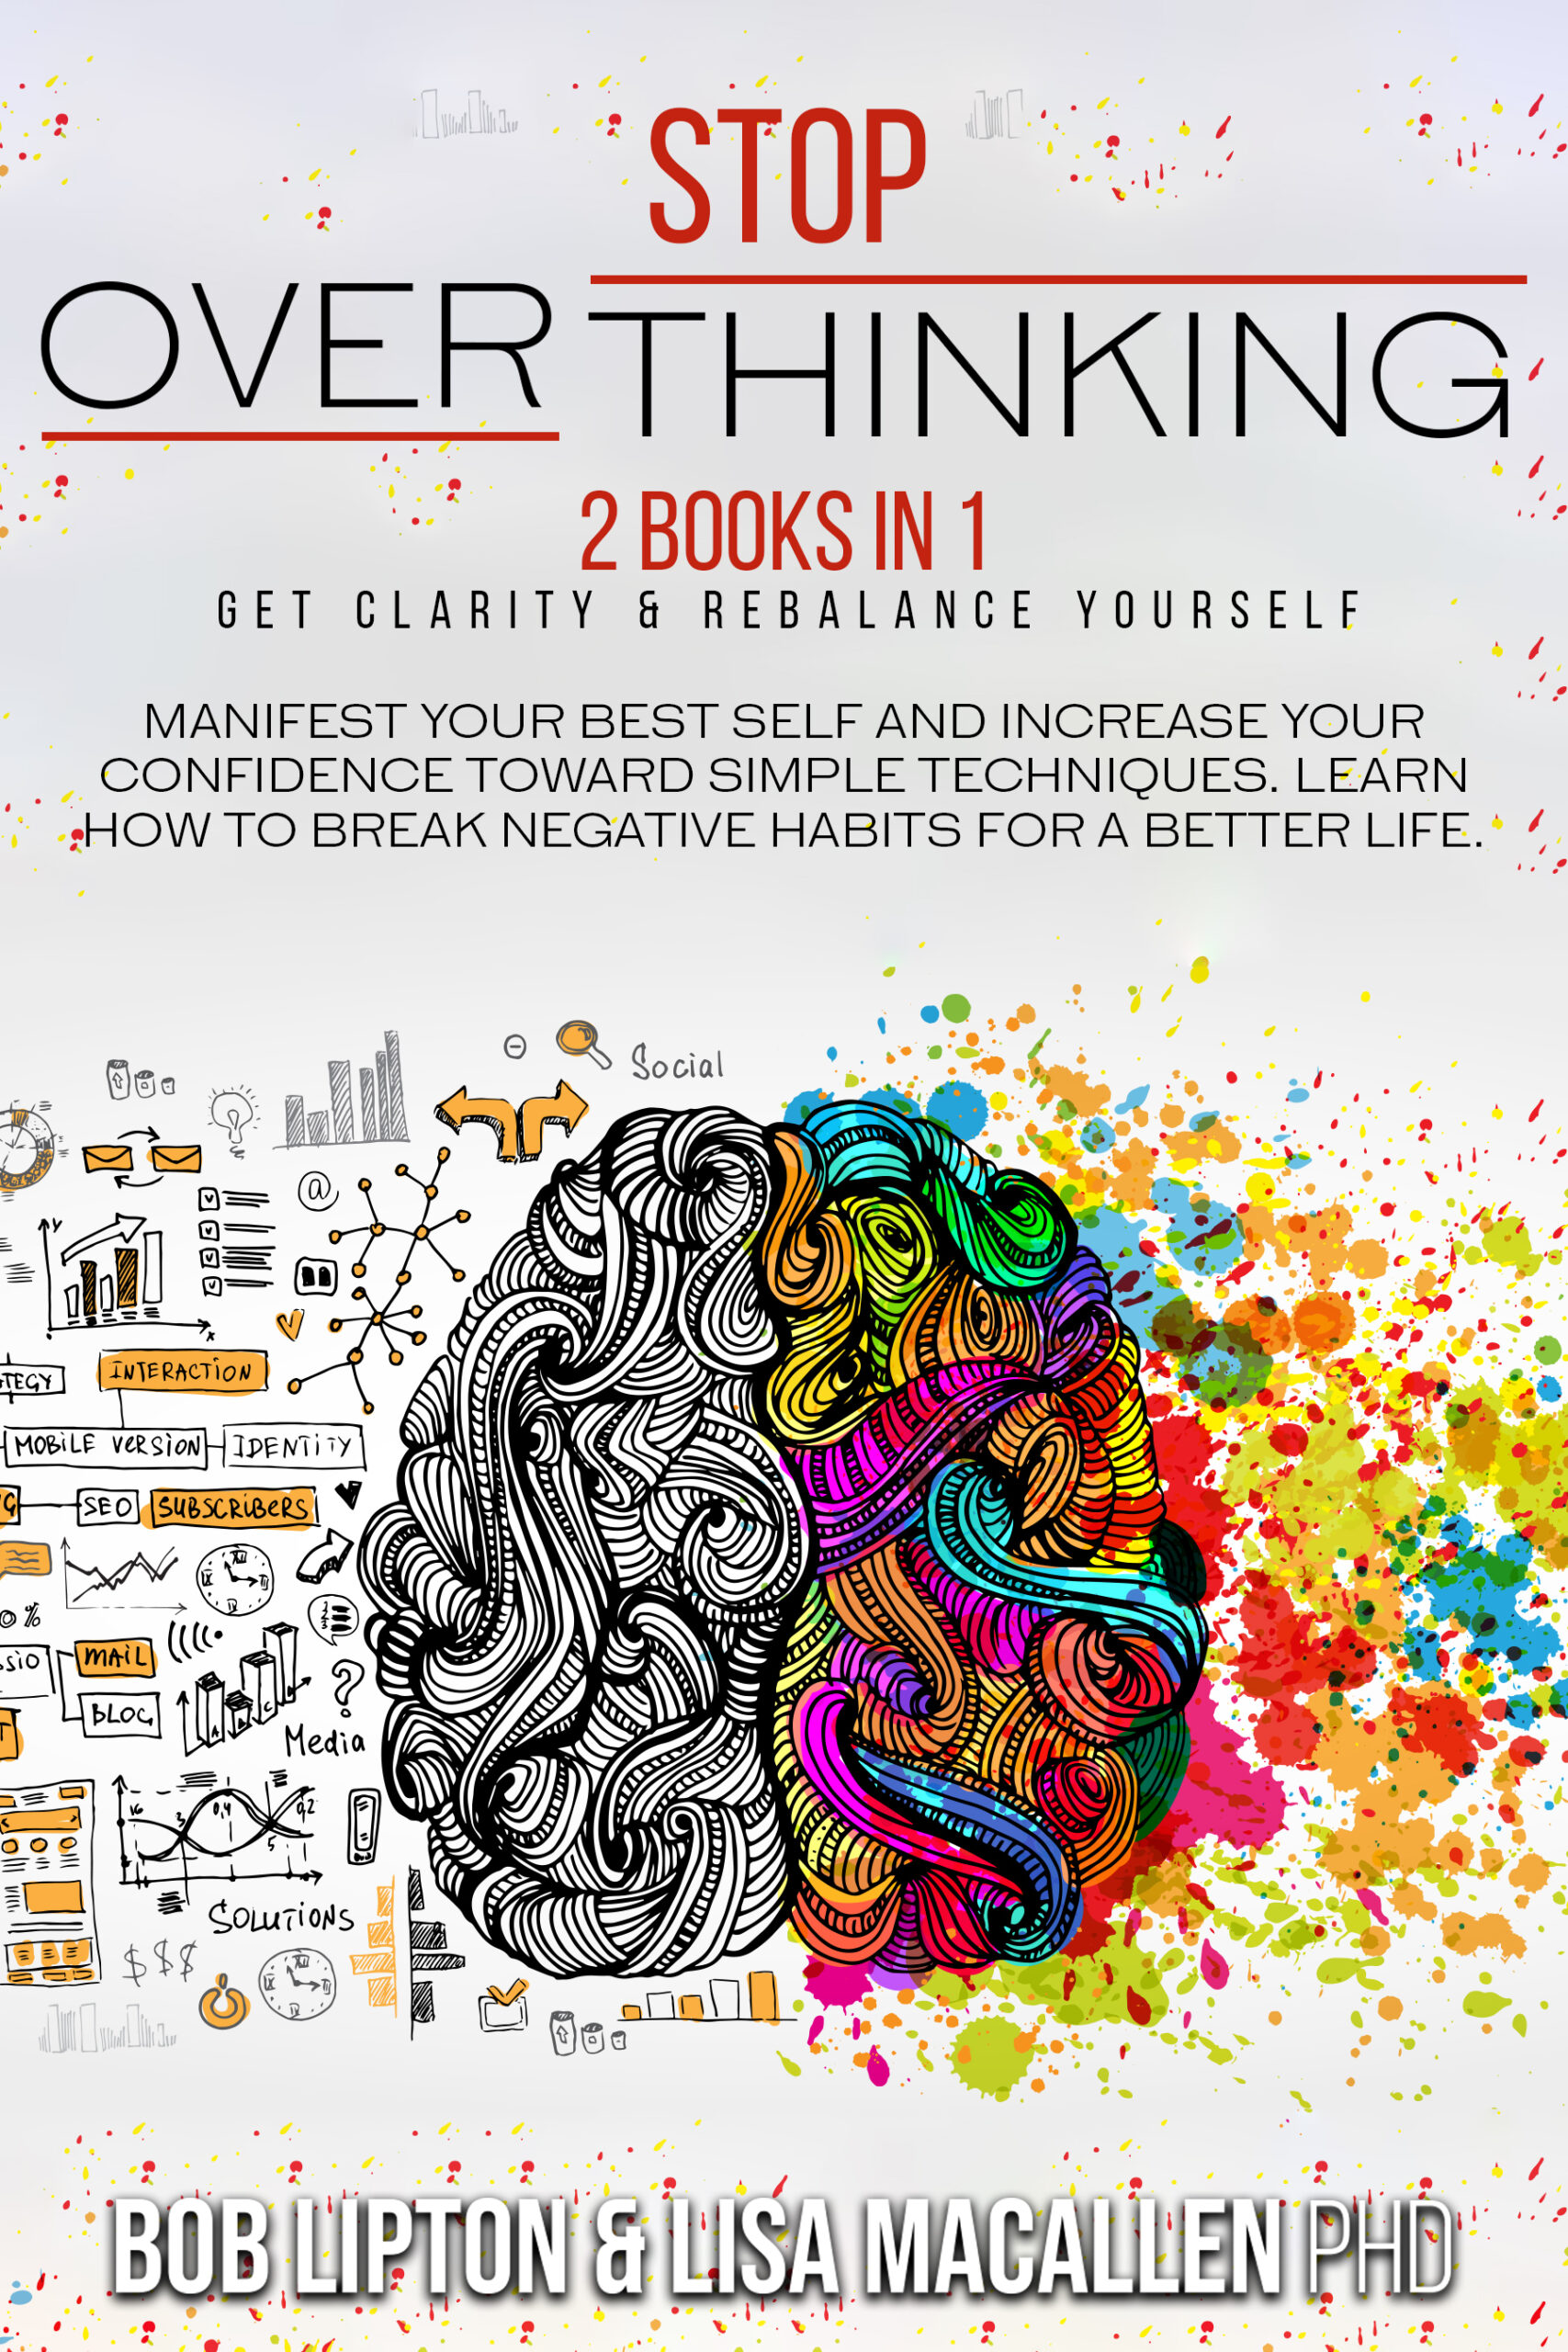 FREE: Stop Overthinking 2 books in 1. Get Clarity & Rebalance Yourself by Lisa Macallen